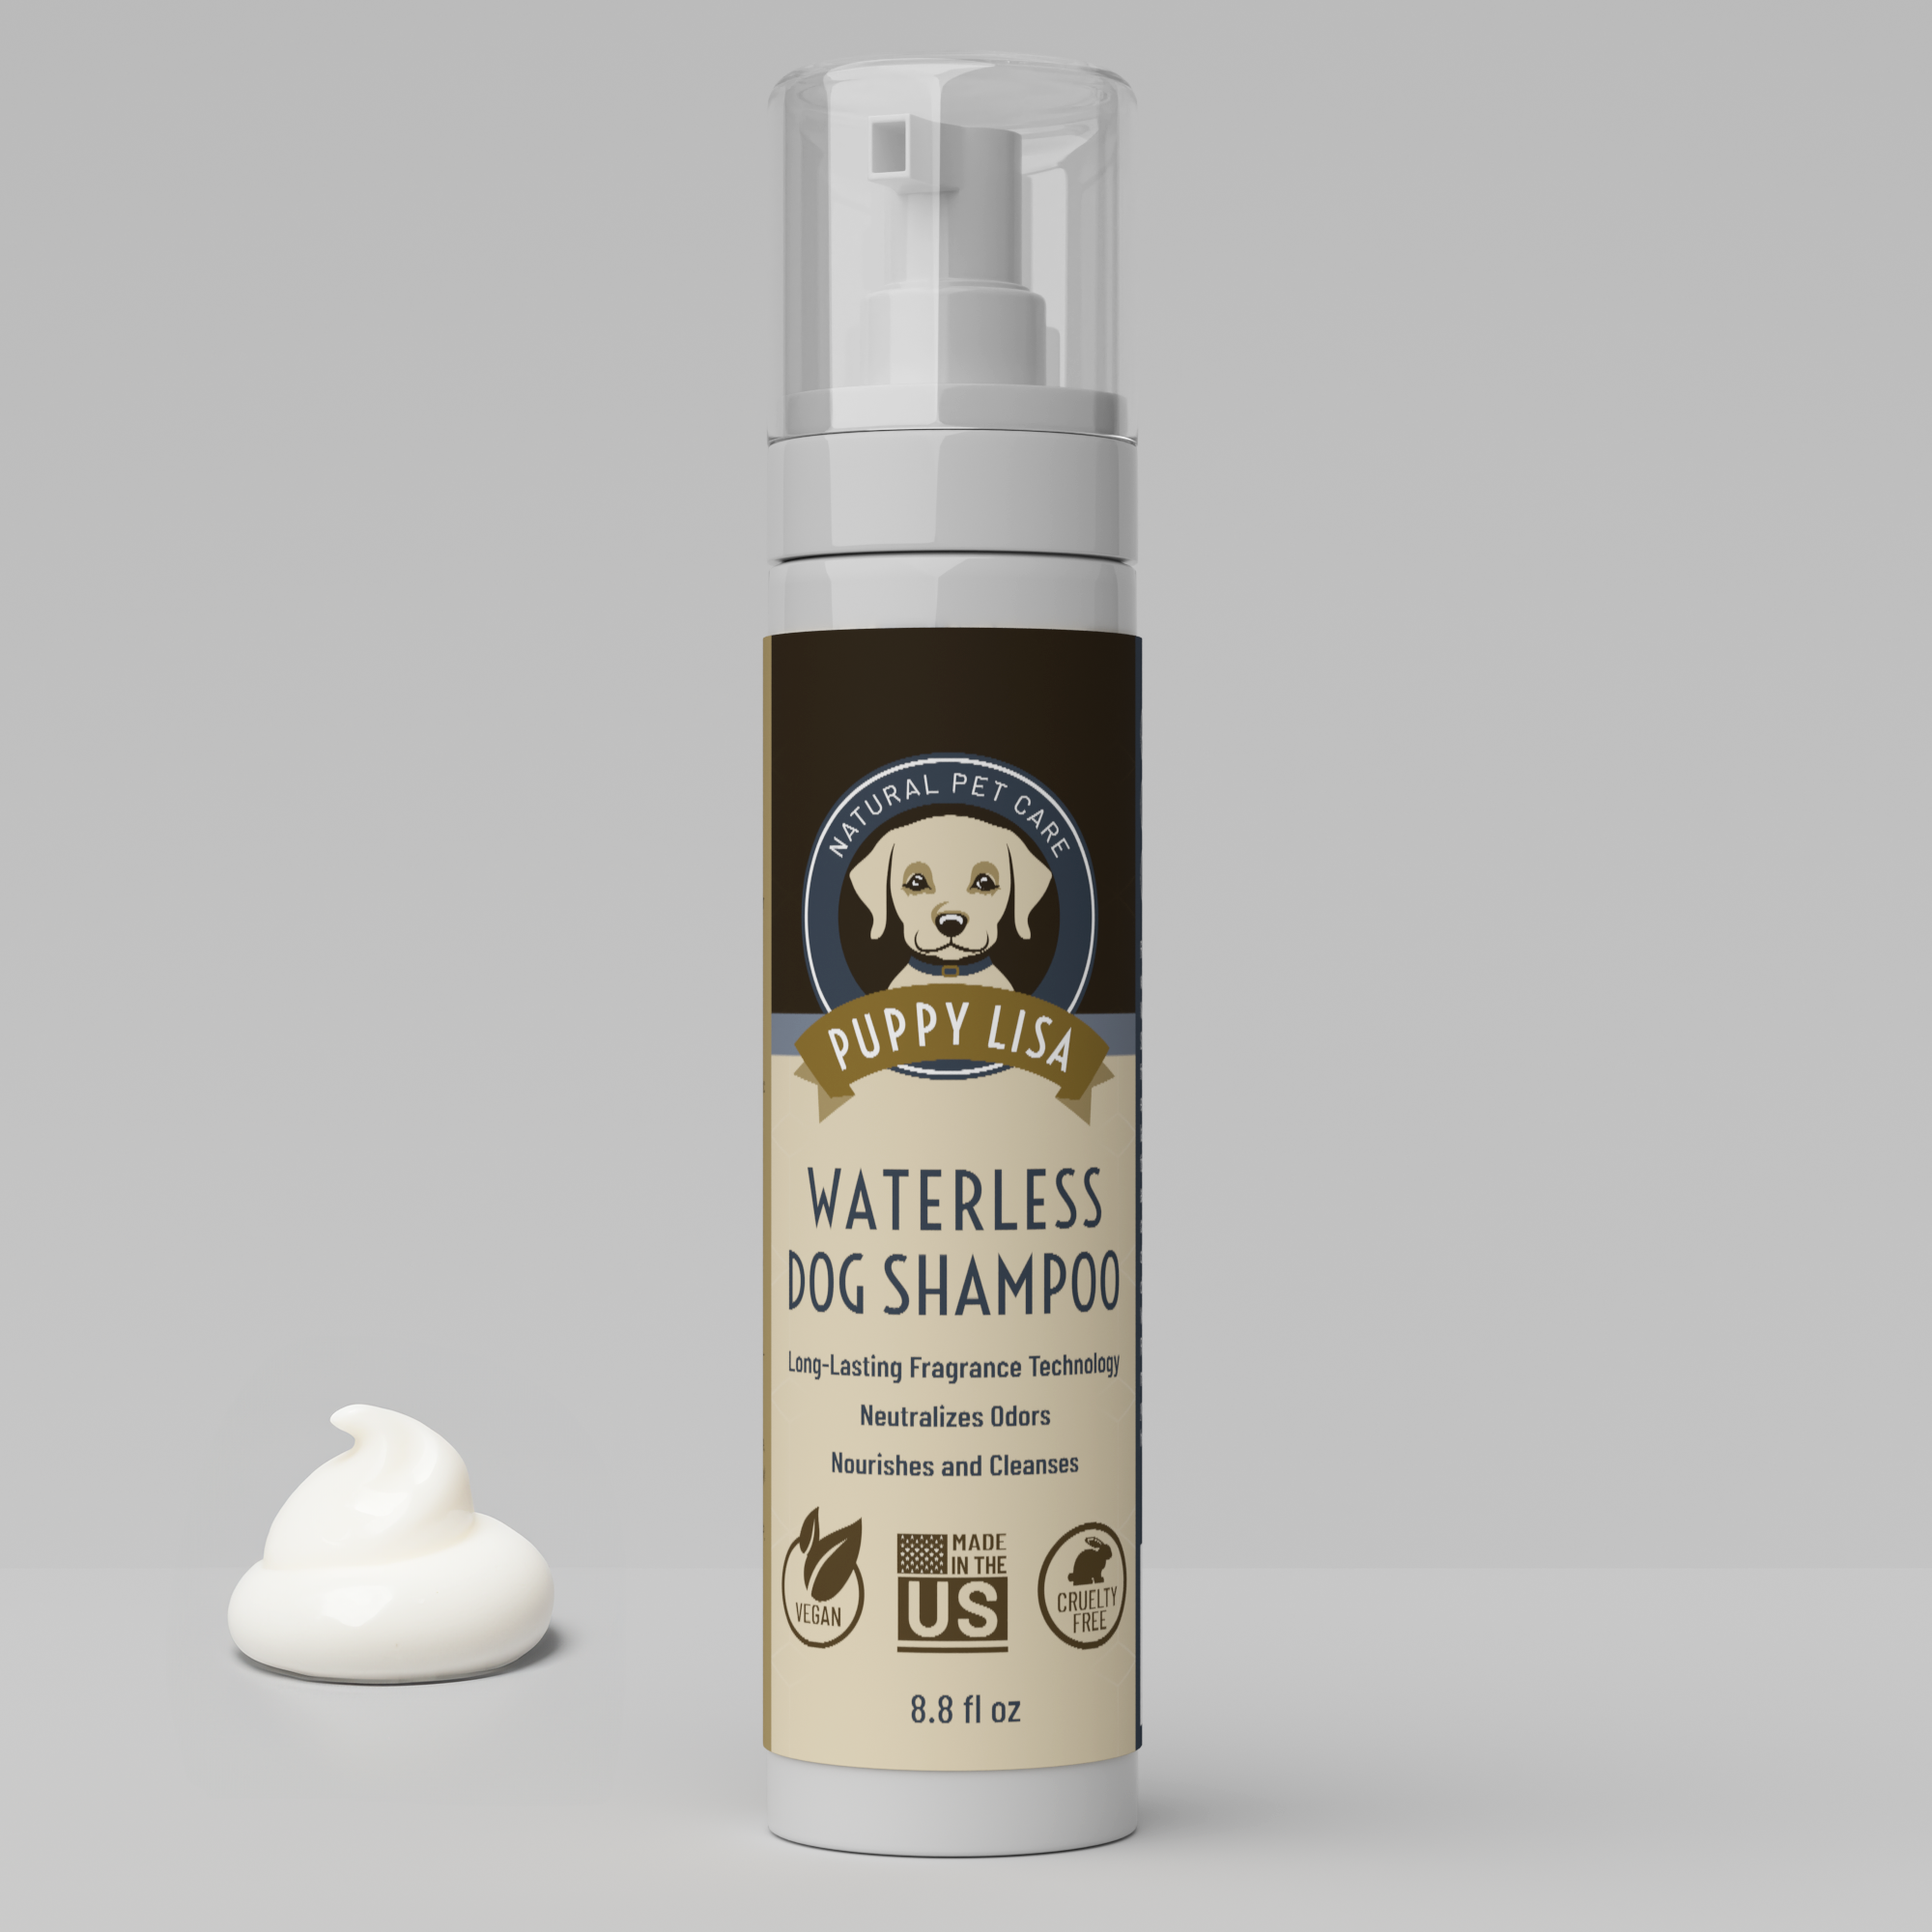 Waterless Shampoo For Dogs Made in the US Puppy